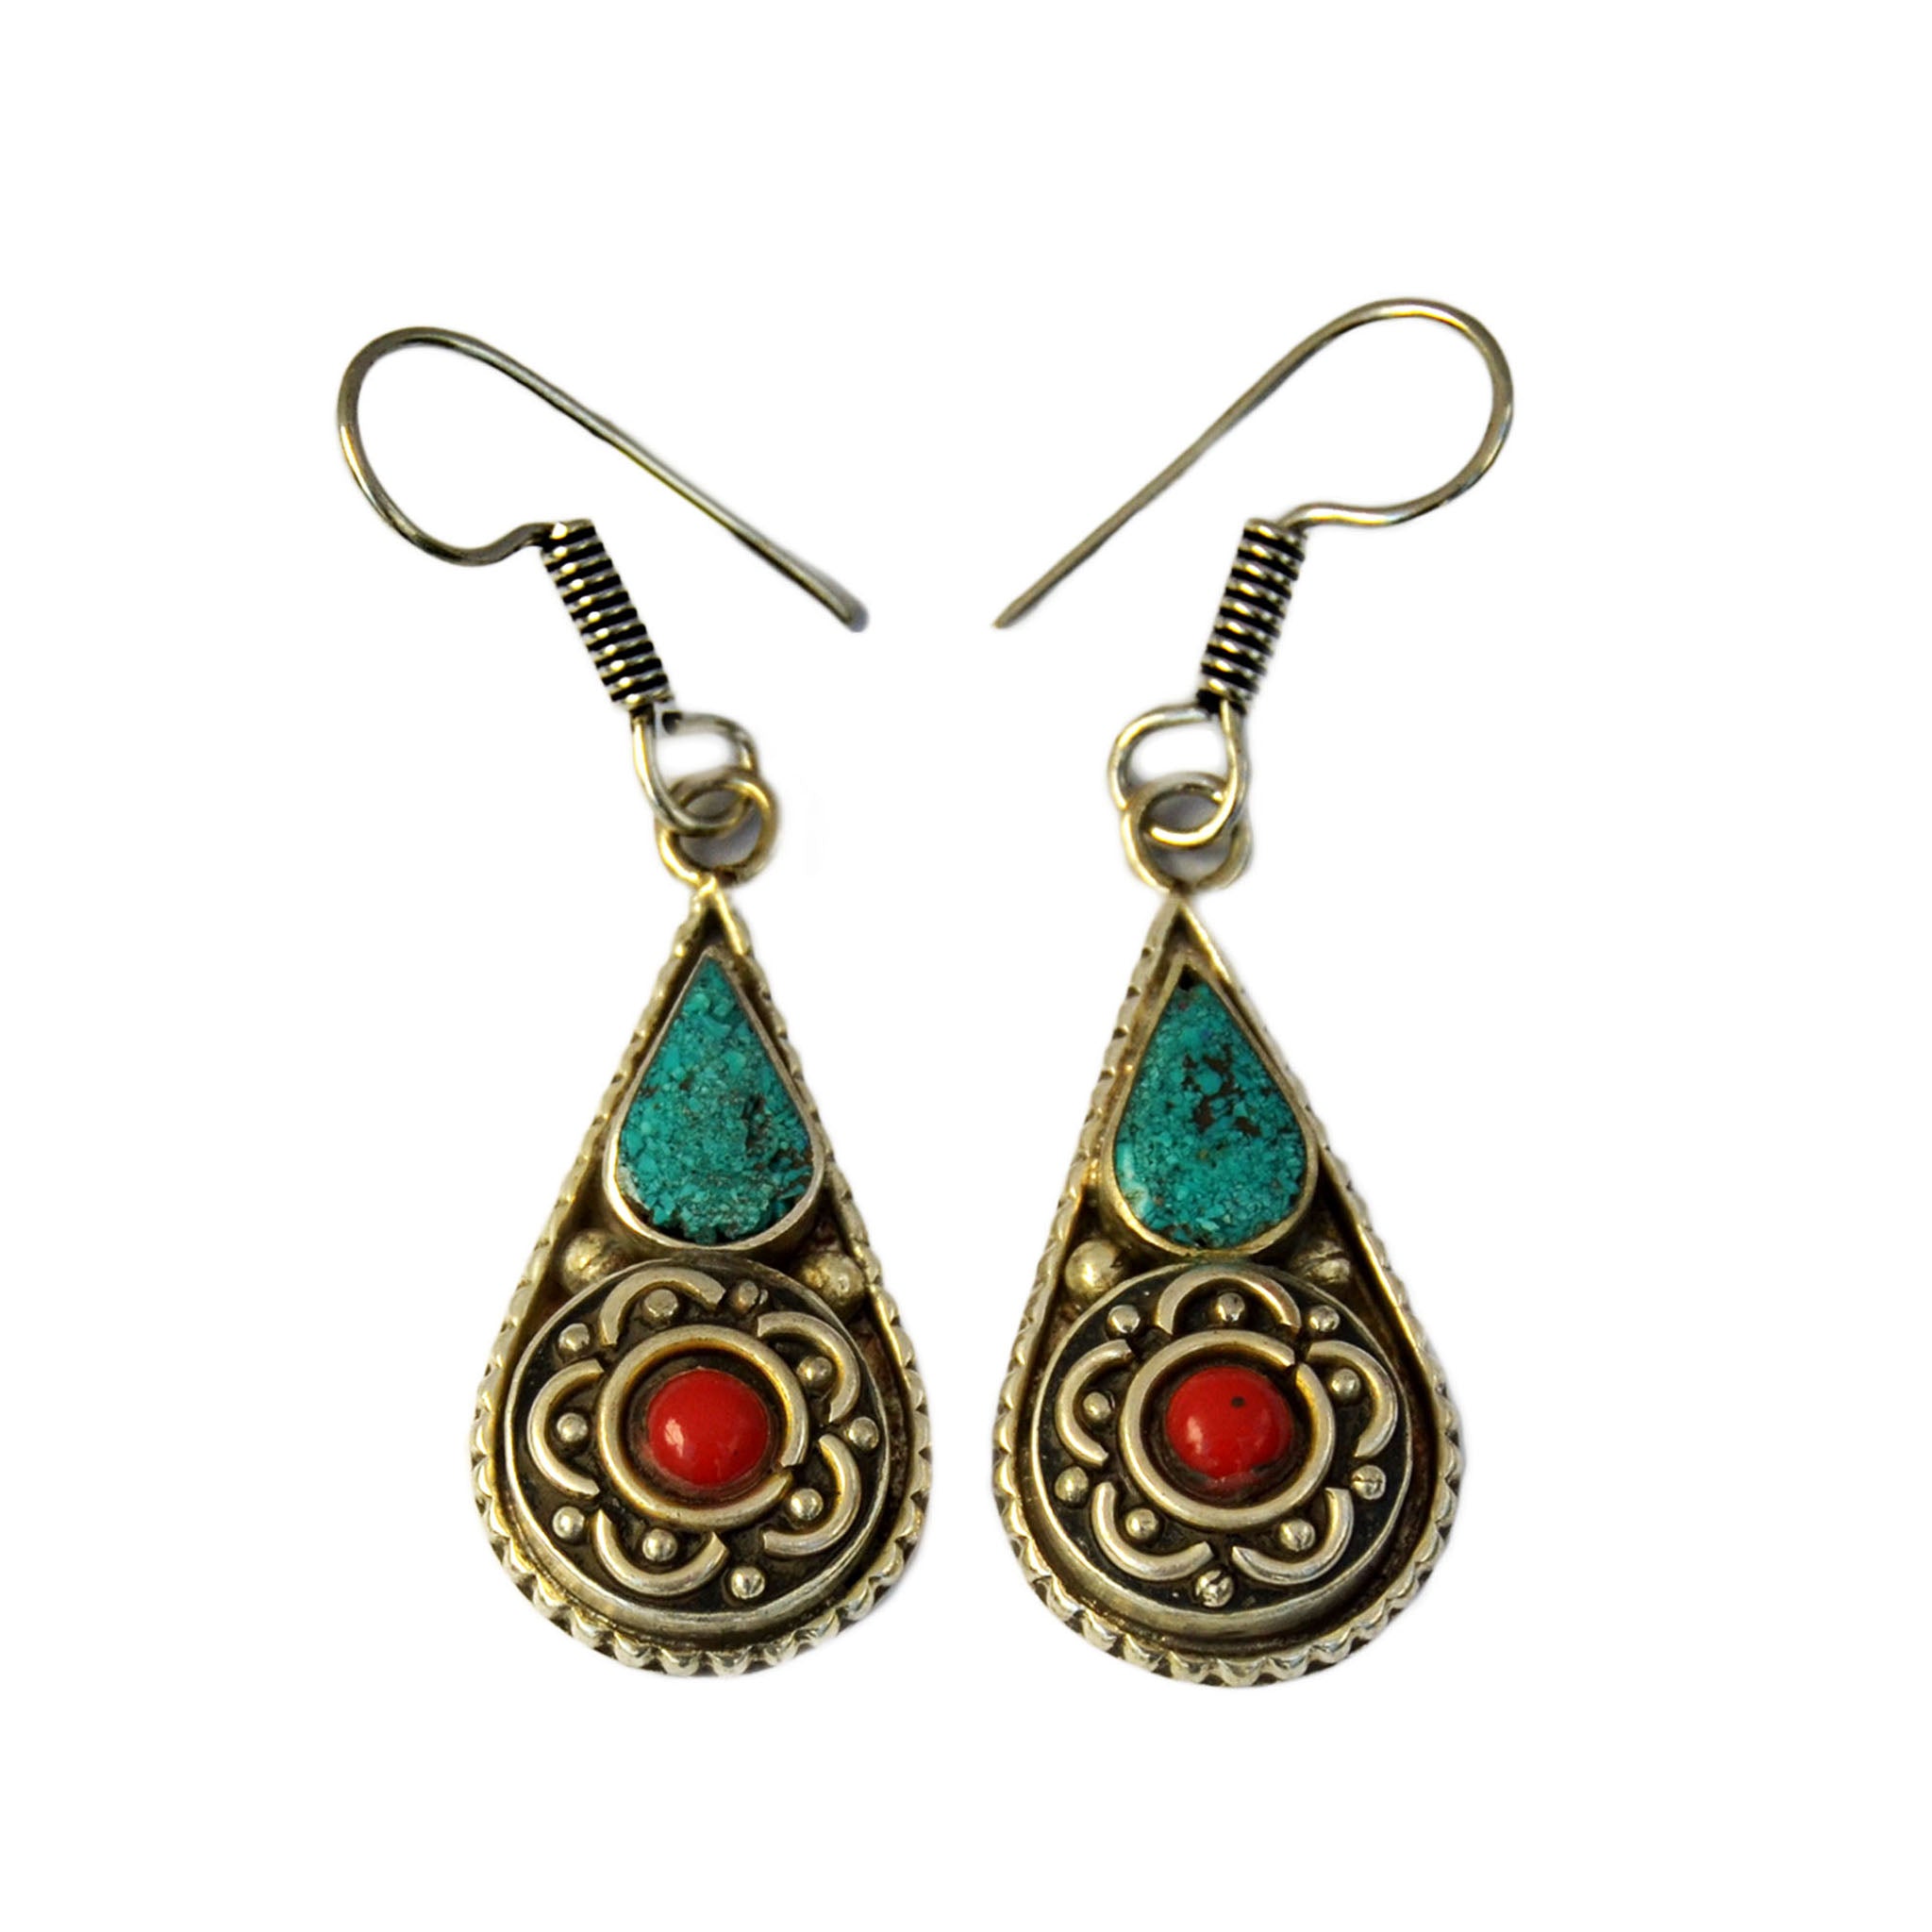 Silver drop ethnic earrings with inlay turquoise and red coral stones